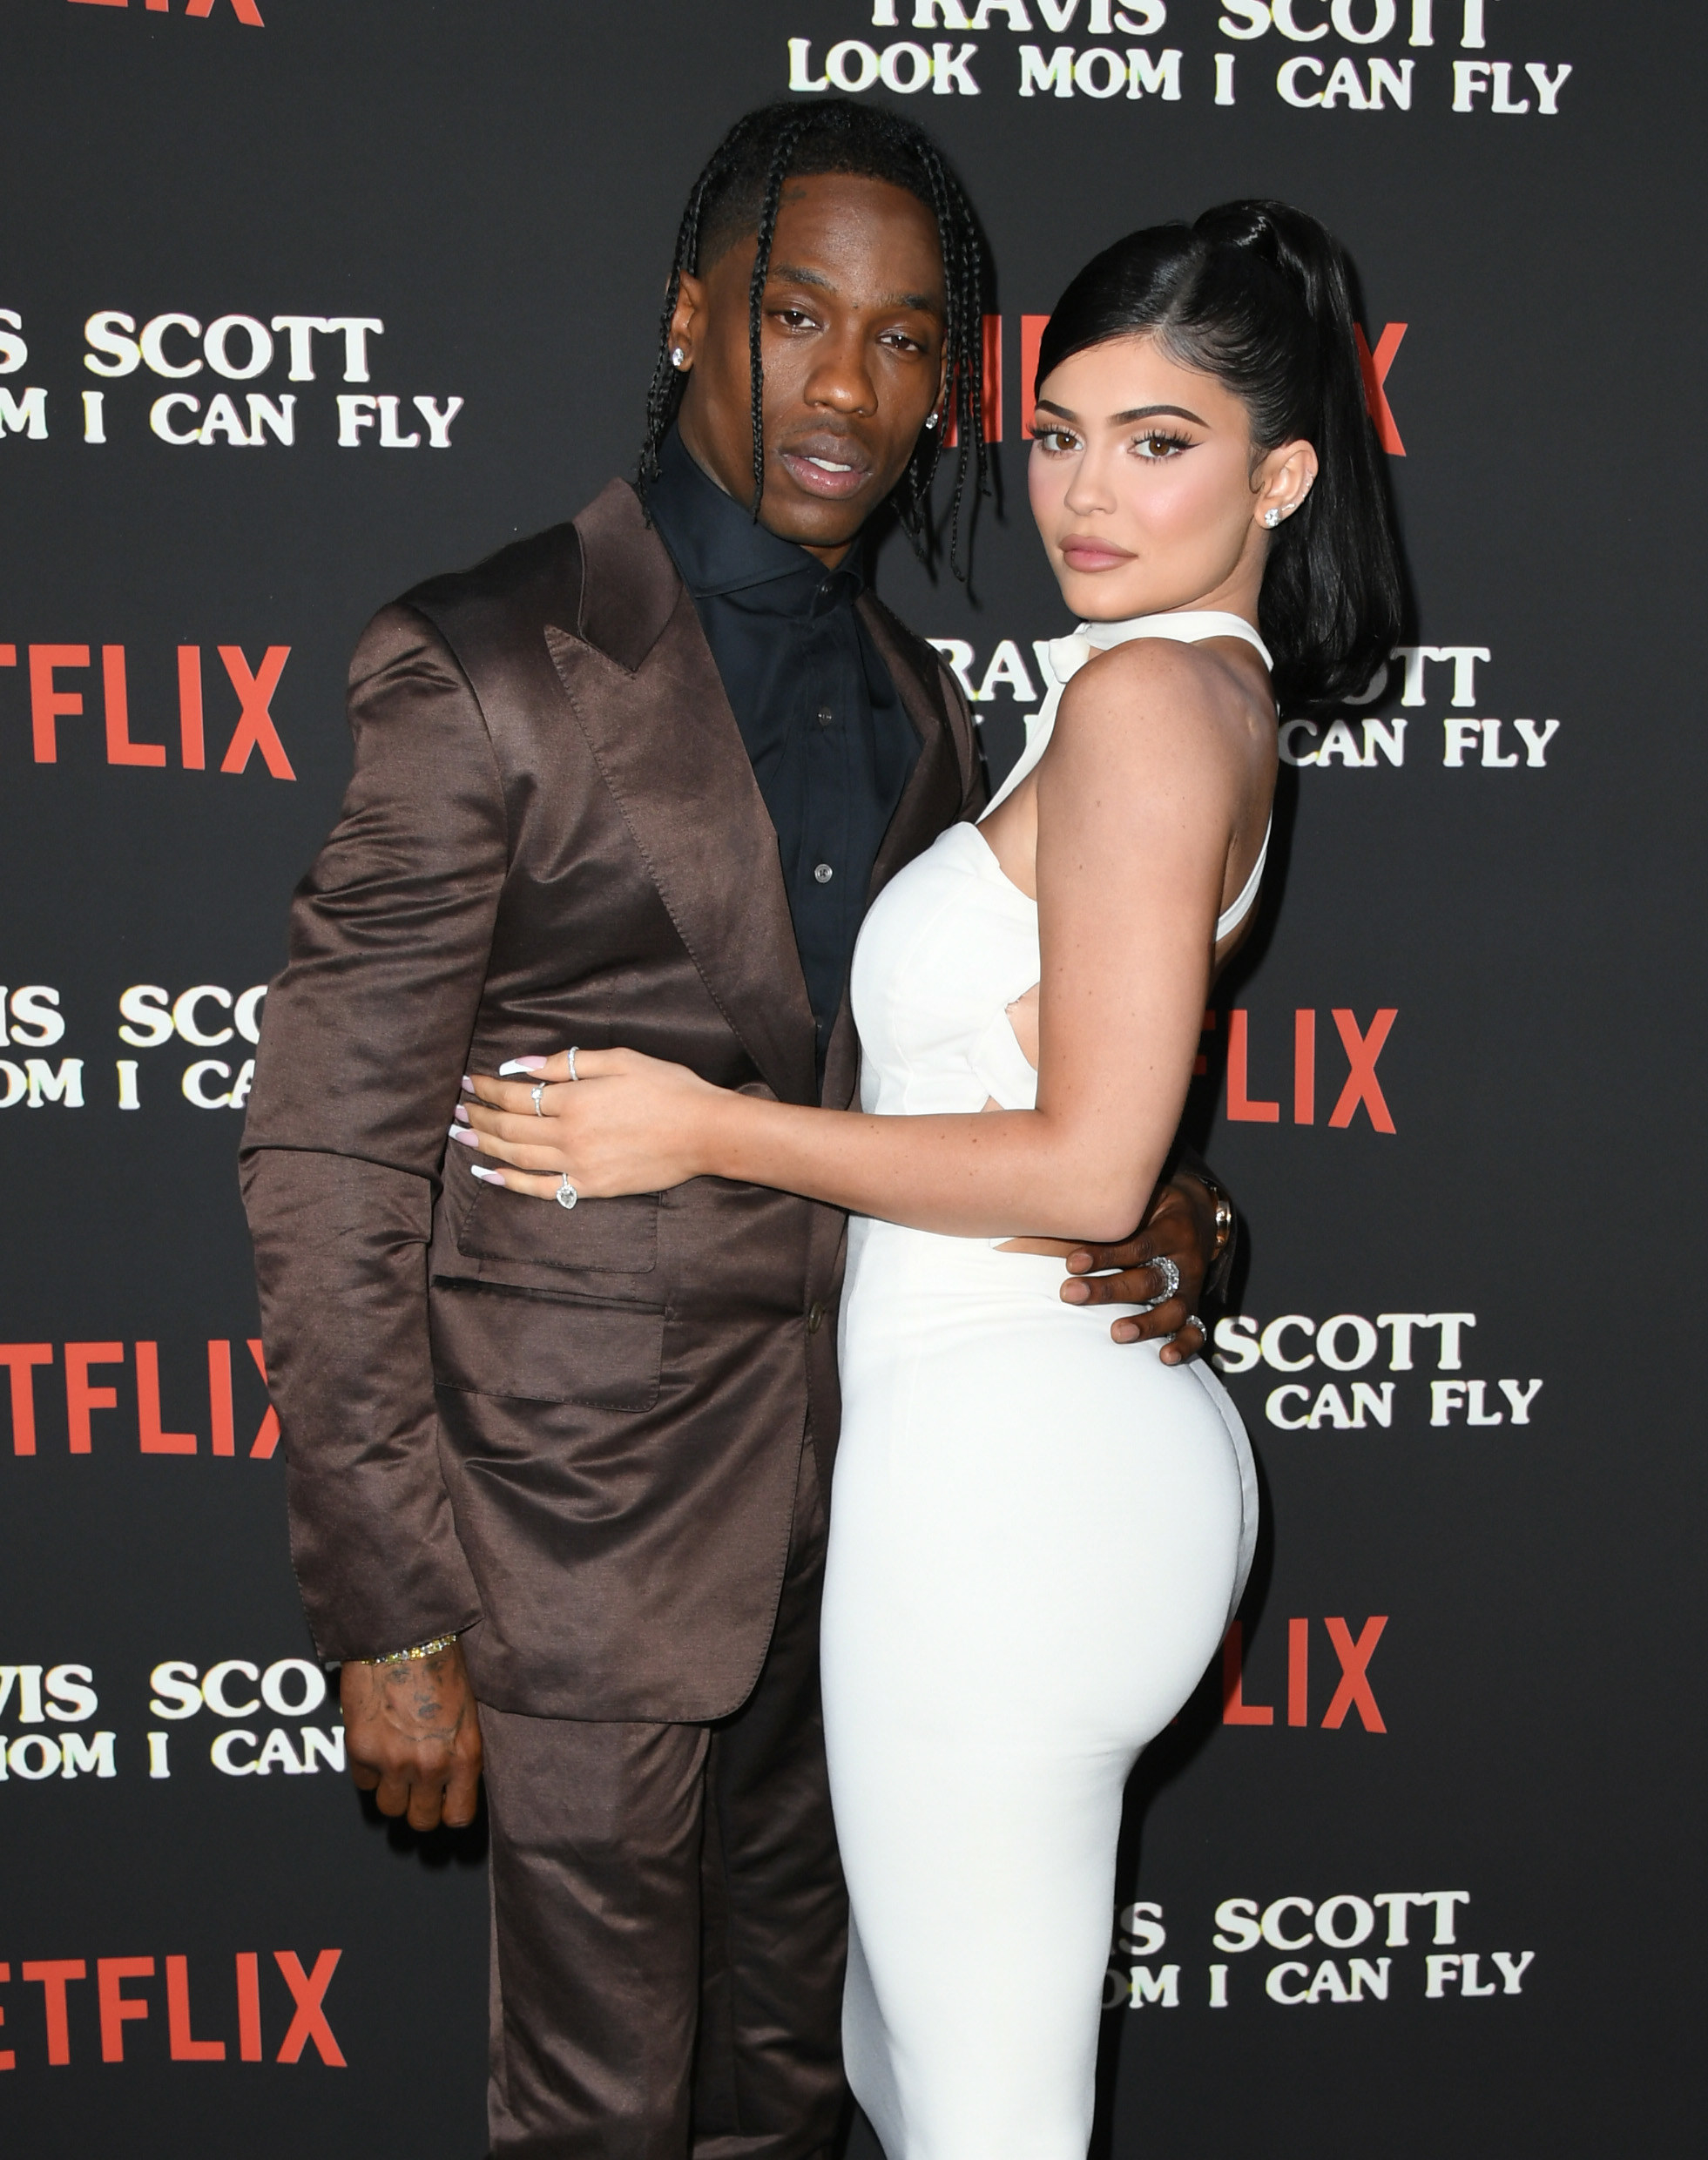 Travis Scott and Kylie Jenner arrive at the &quot;Travis Scott: Look Mom I Can Fly&quot;premiere on August 27, 2019